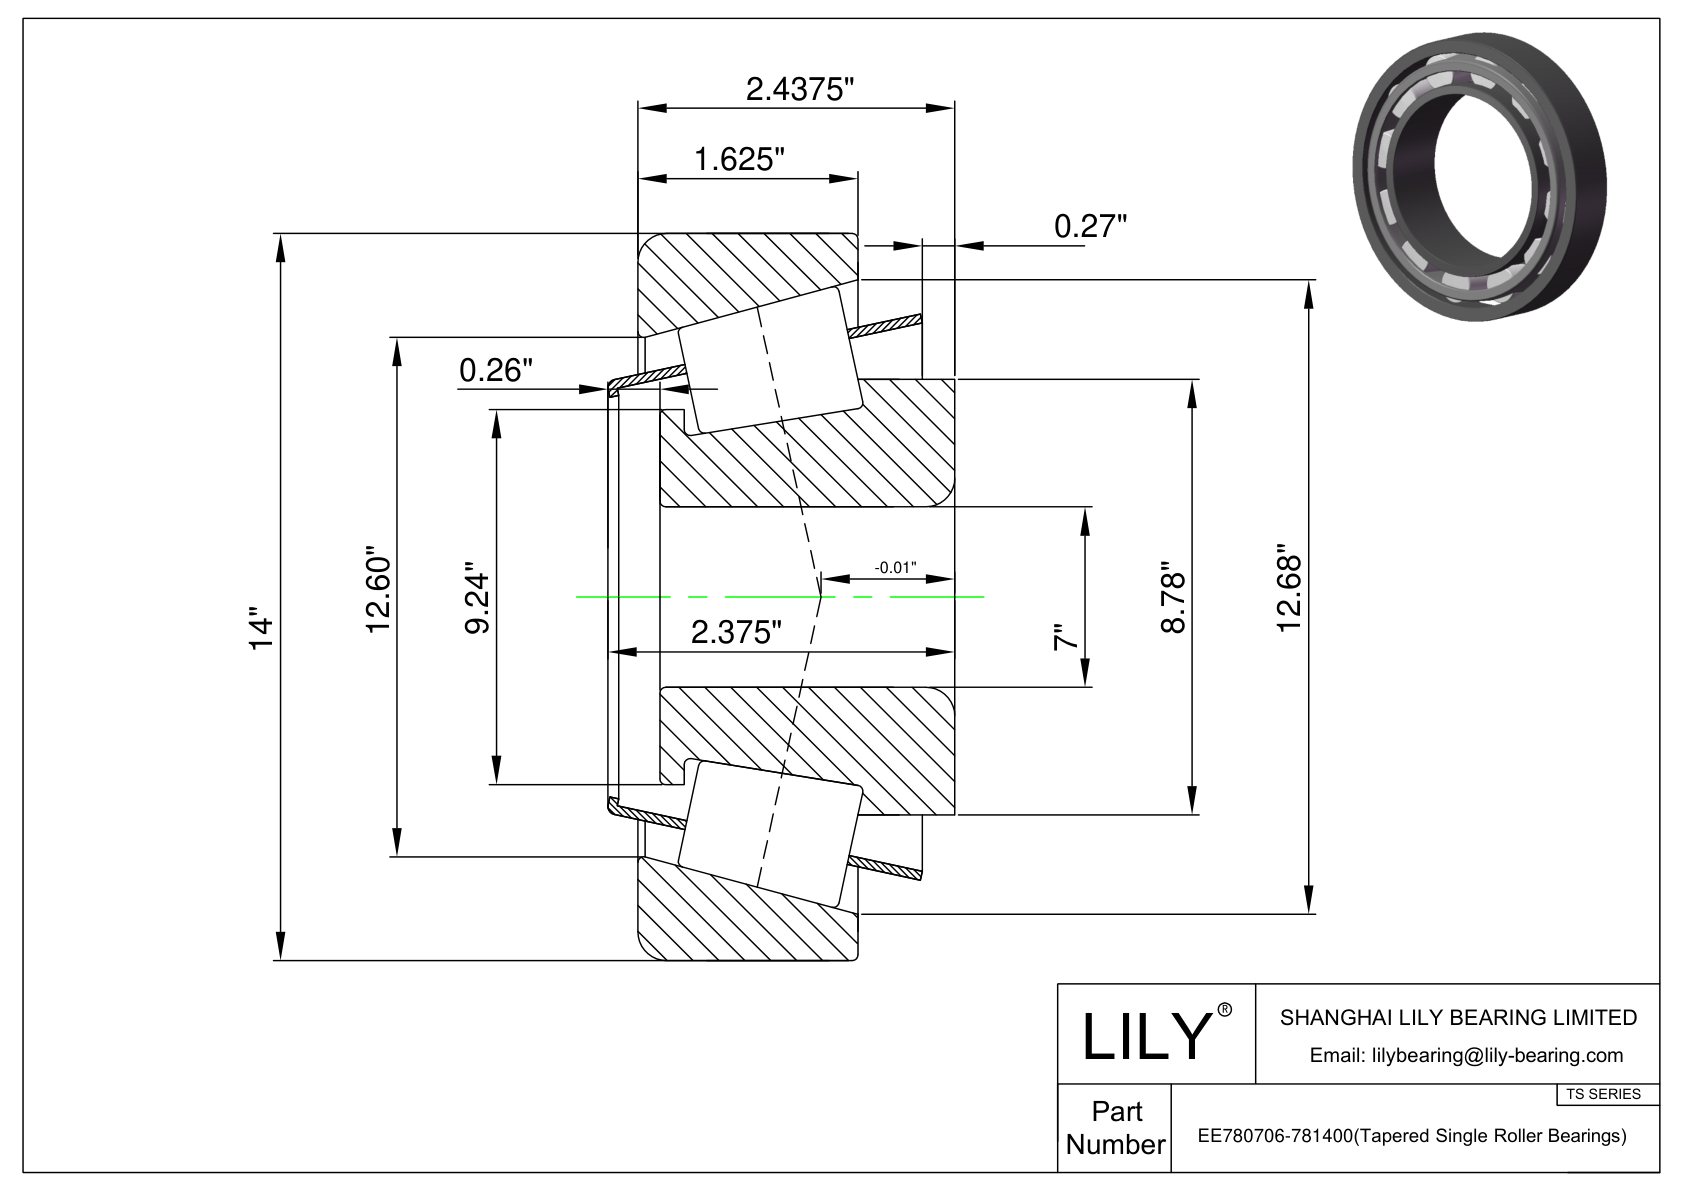 EE780706-781400 TS (Tapered Single Roller Bearings) (Imperial) cad drawing